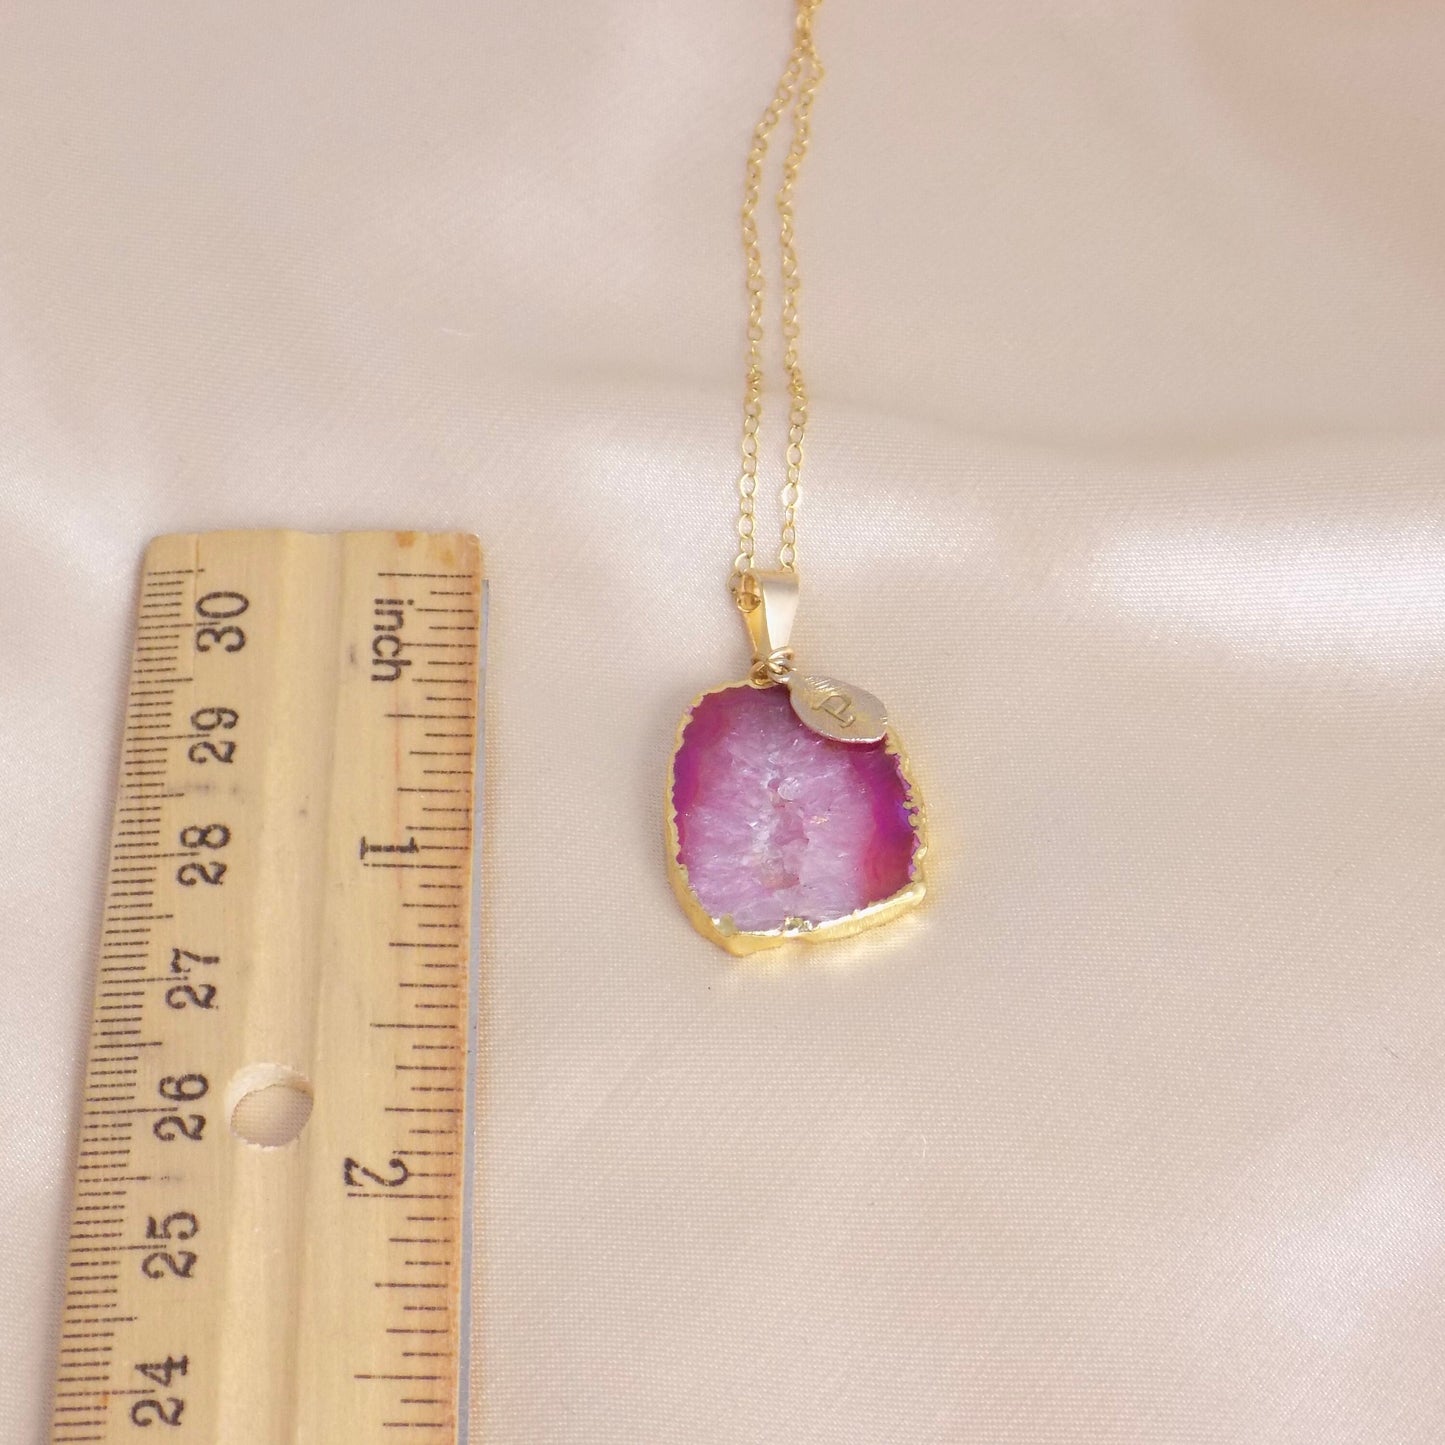 Pink Druzy Necklace Gold Fill Chain - Small Geode Necklace